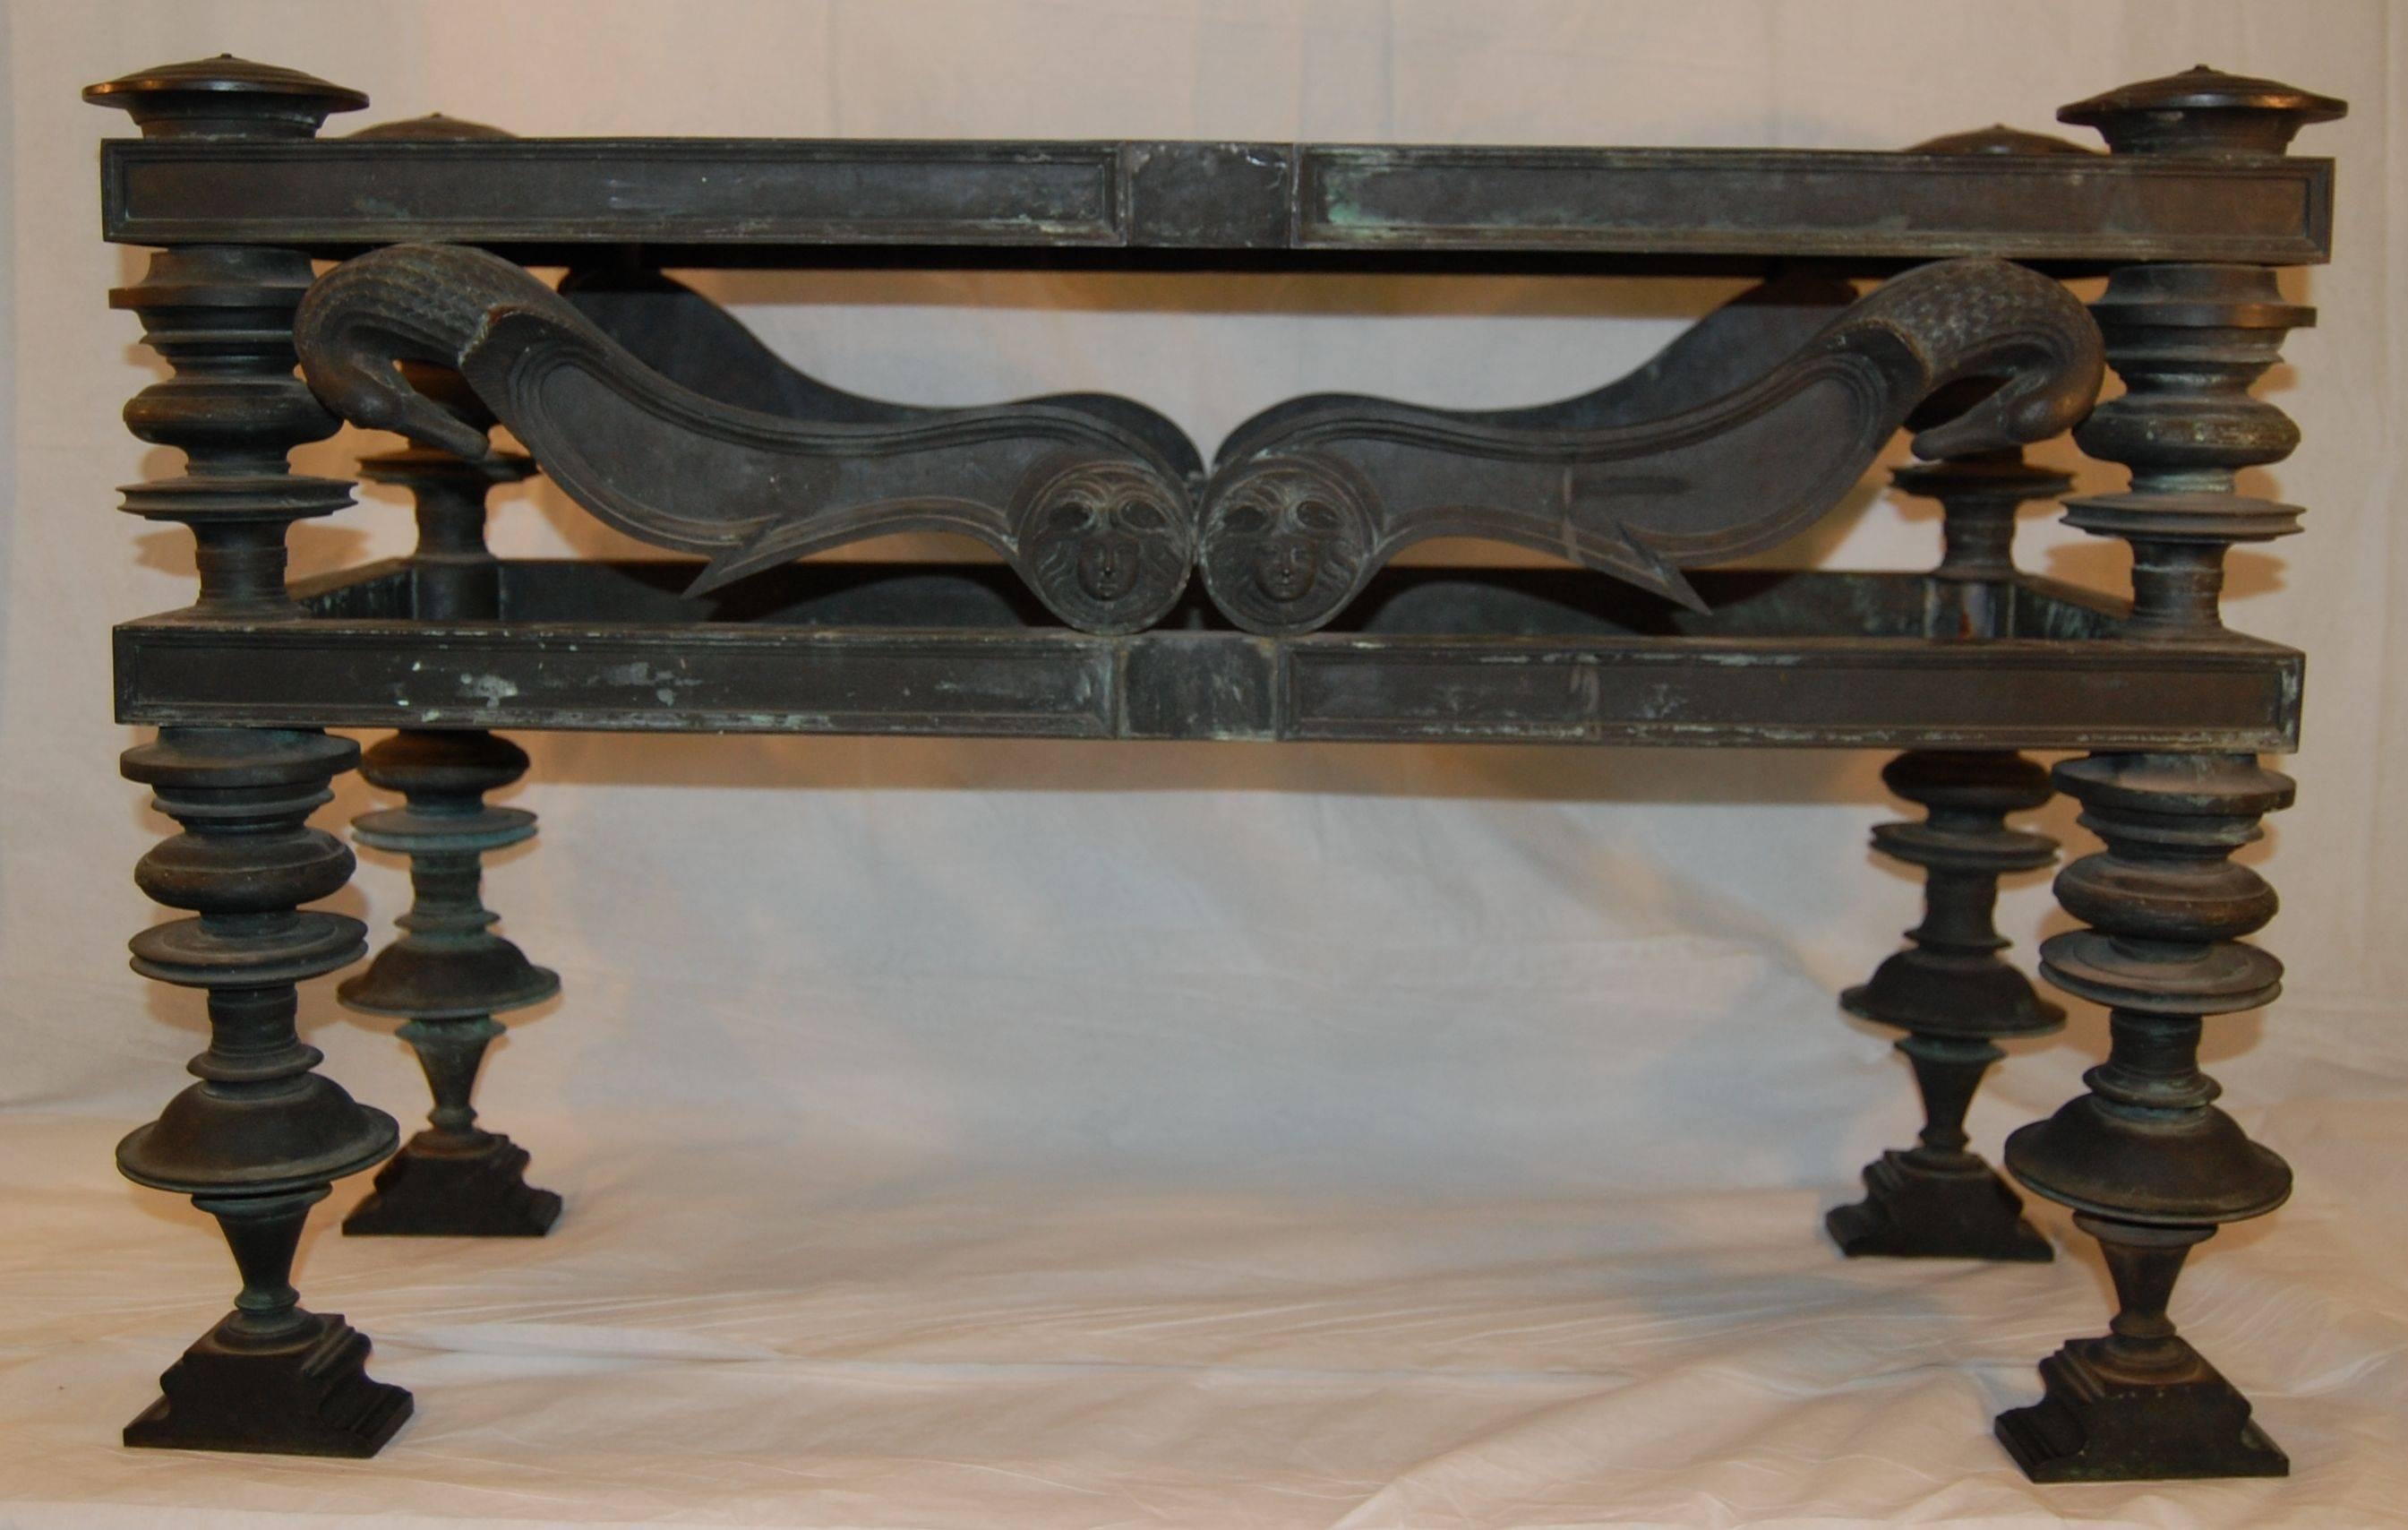 Grand Tour 19th Century Bronze and Marble 'Seat of Honor' Table by Sabatino de Angelis For Sale